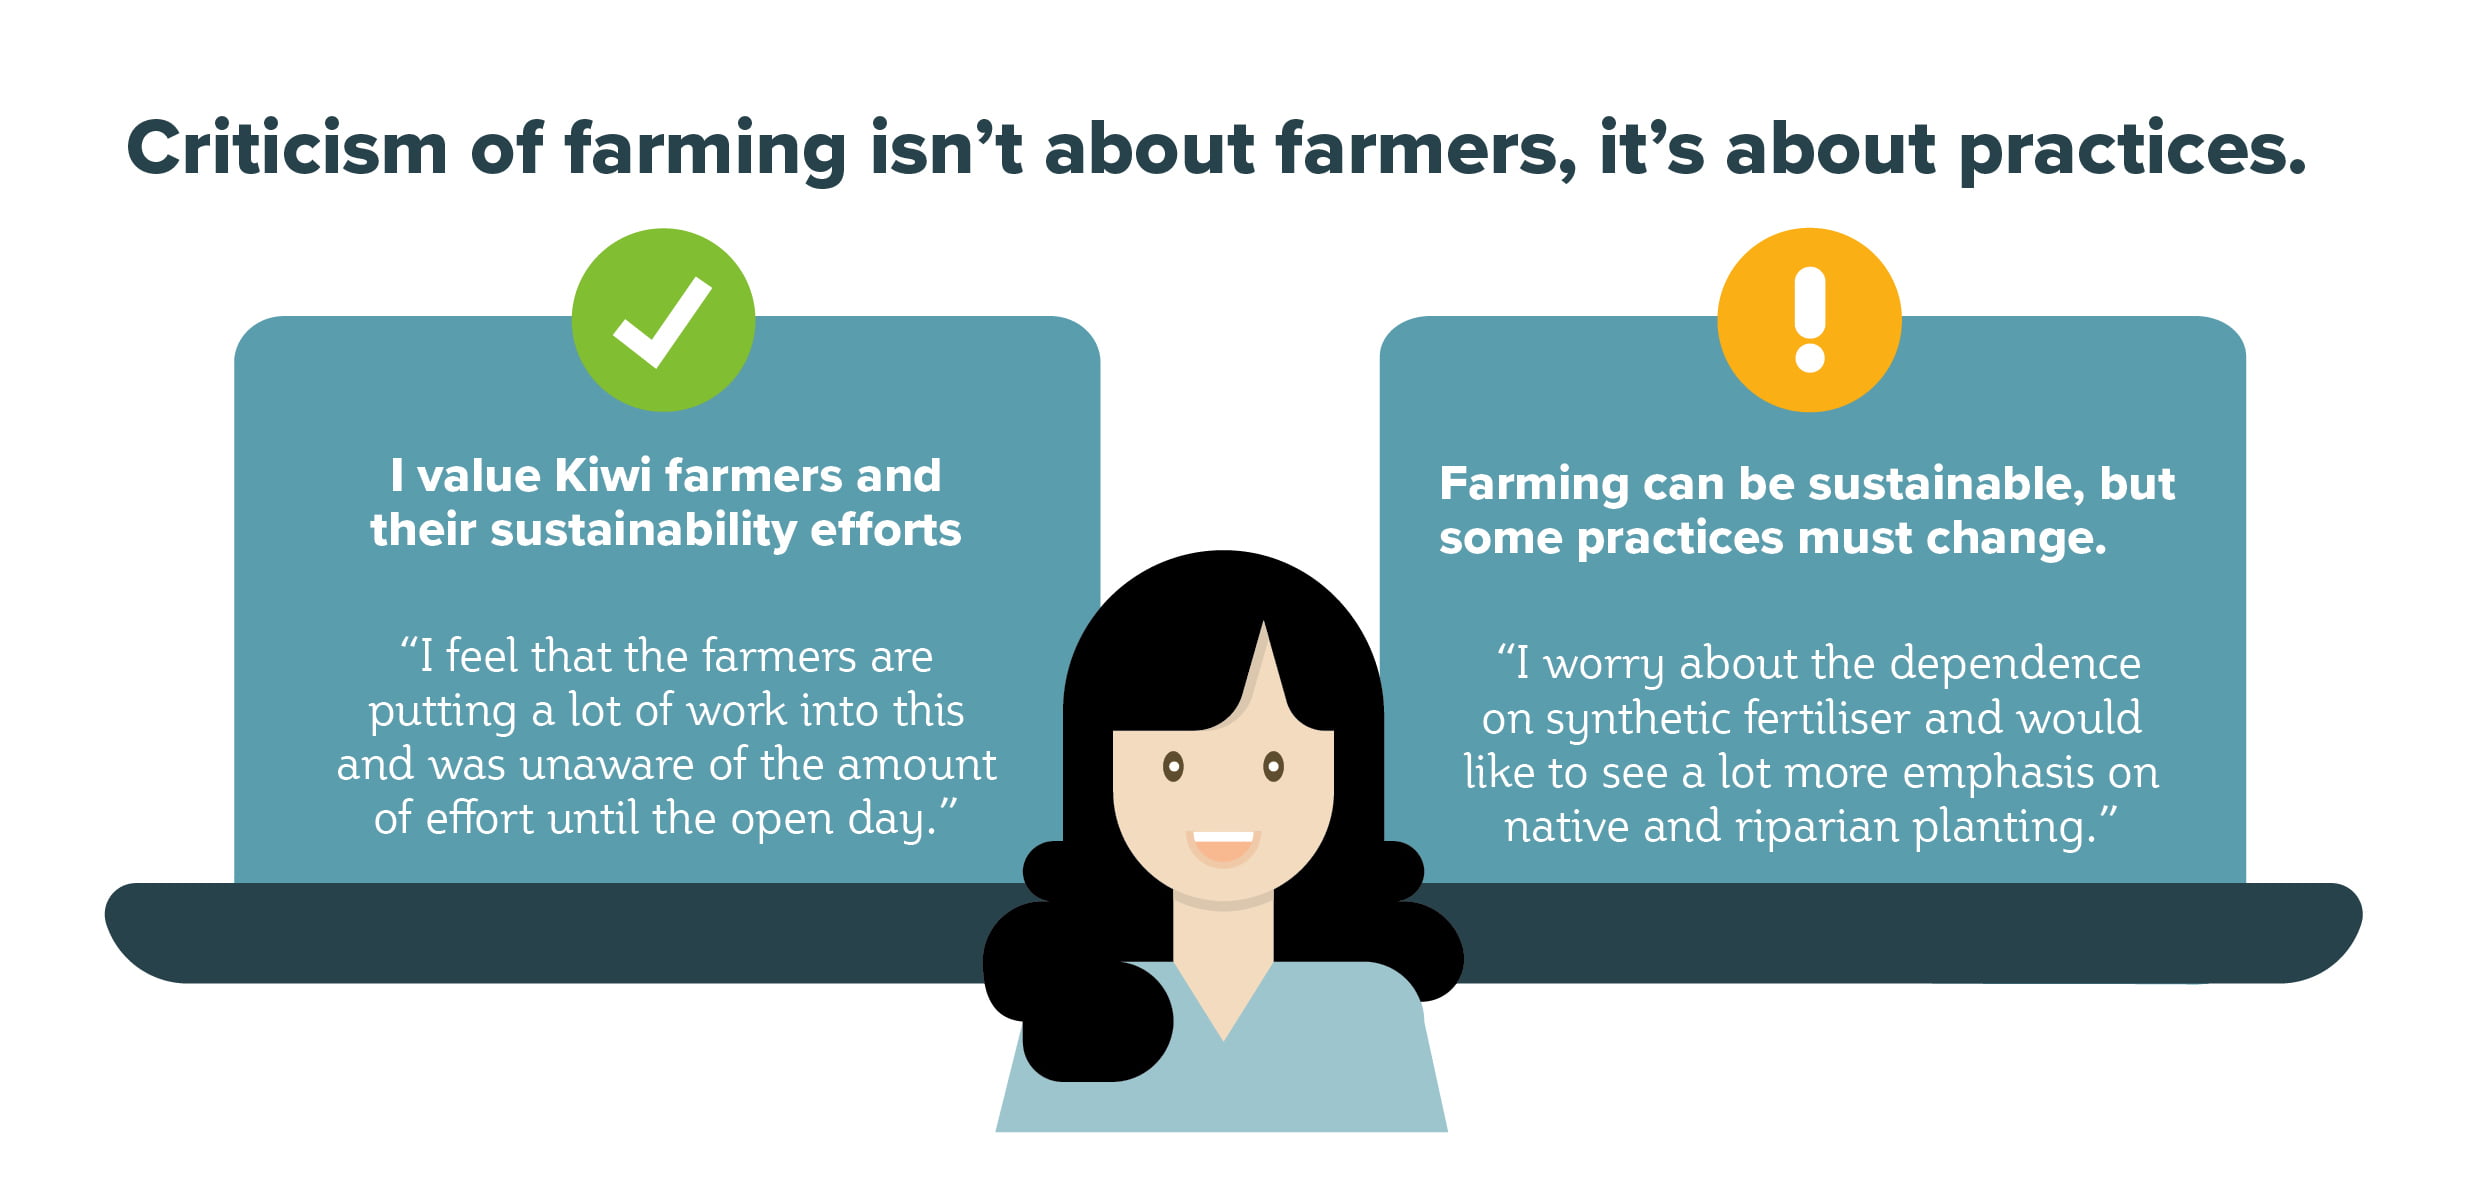 The research suggests that farmers are valued and seen as ‘part of the solution’ in achieving sustainability